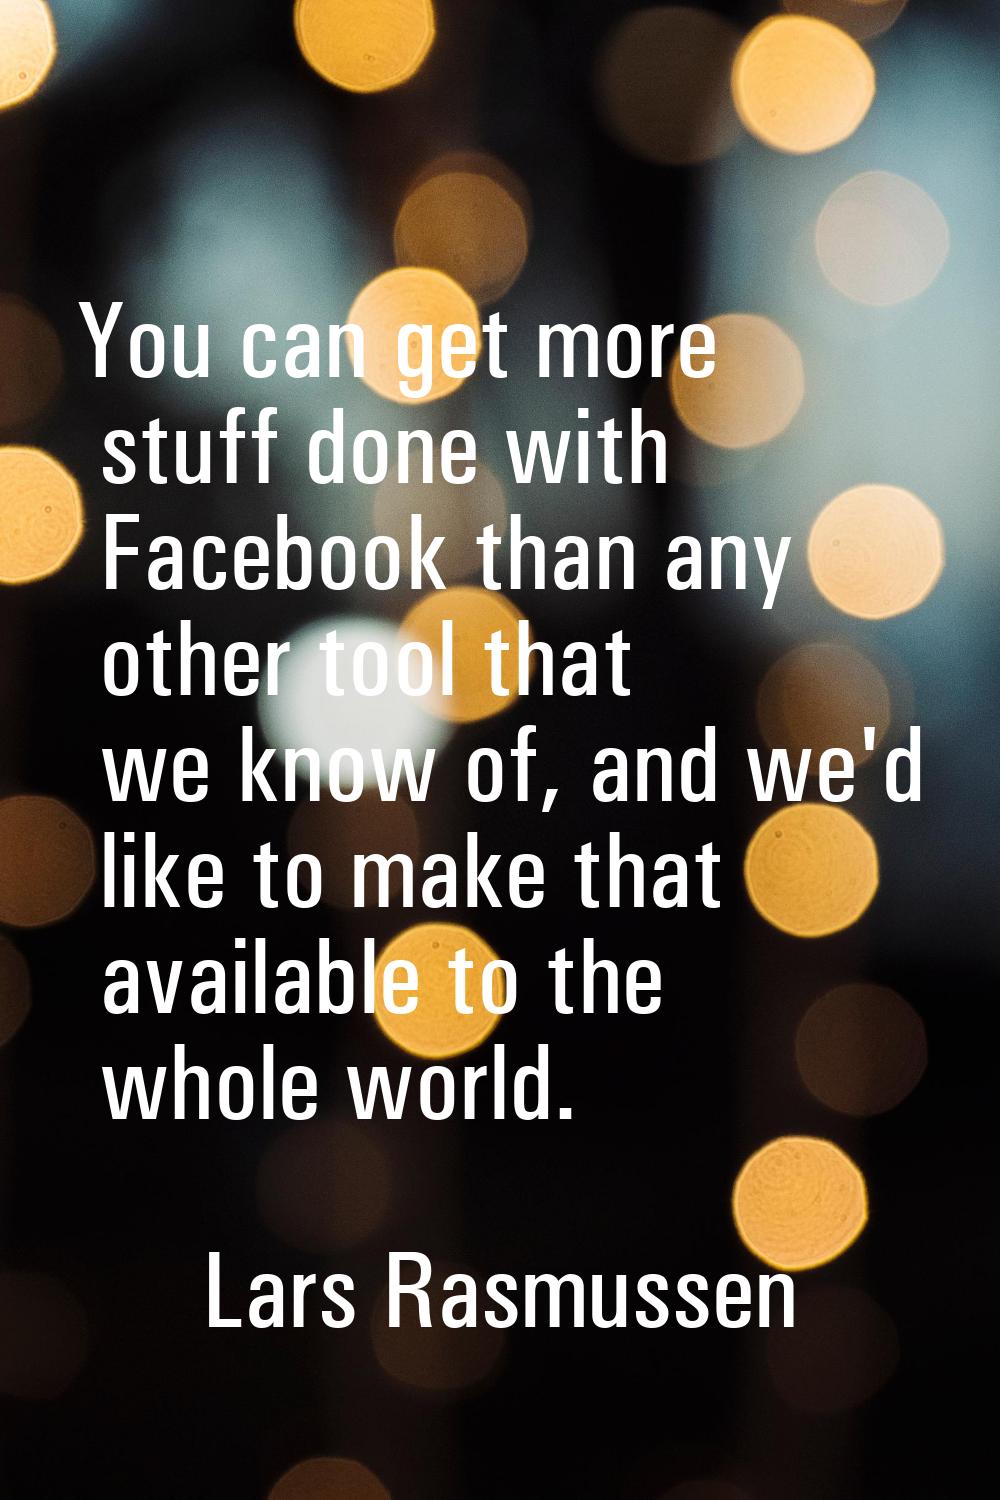 You can get more stuff done with Facebook than any other tool that we know of, and we'd like to mak